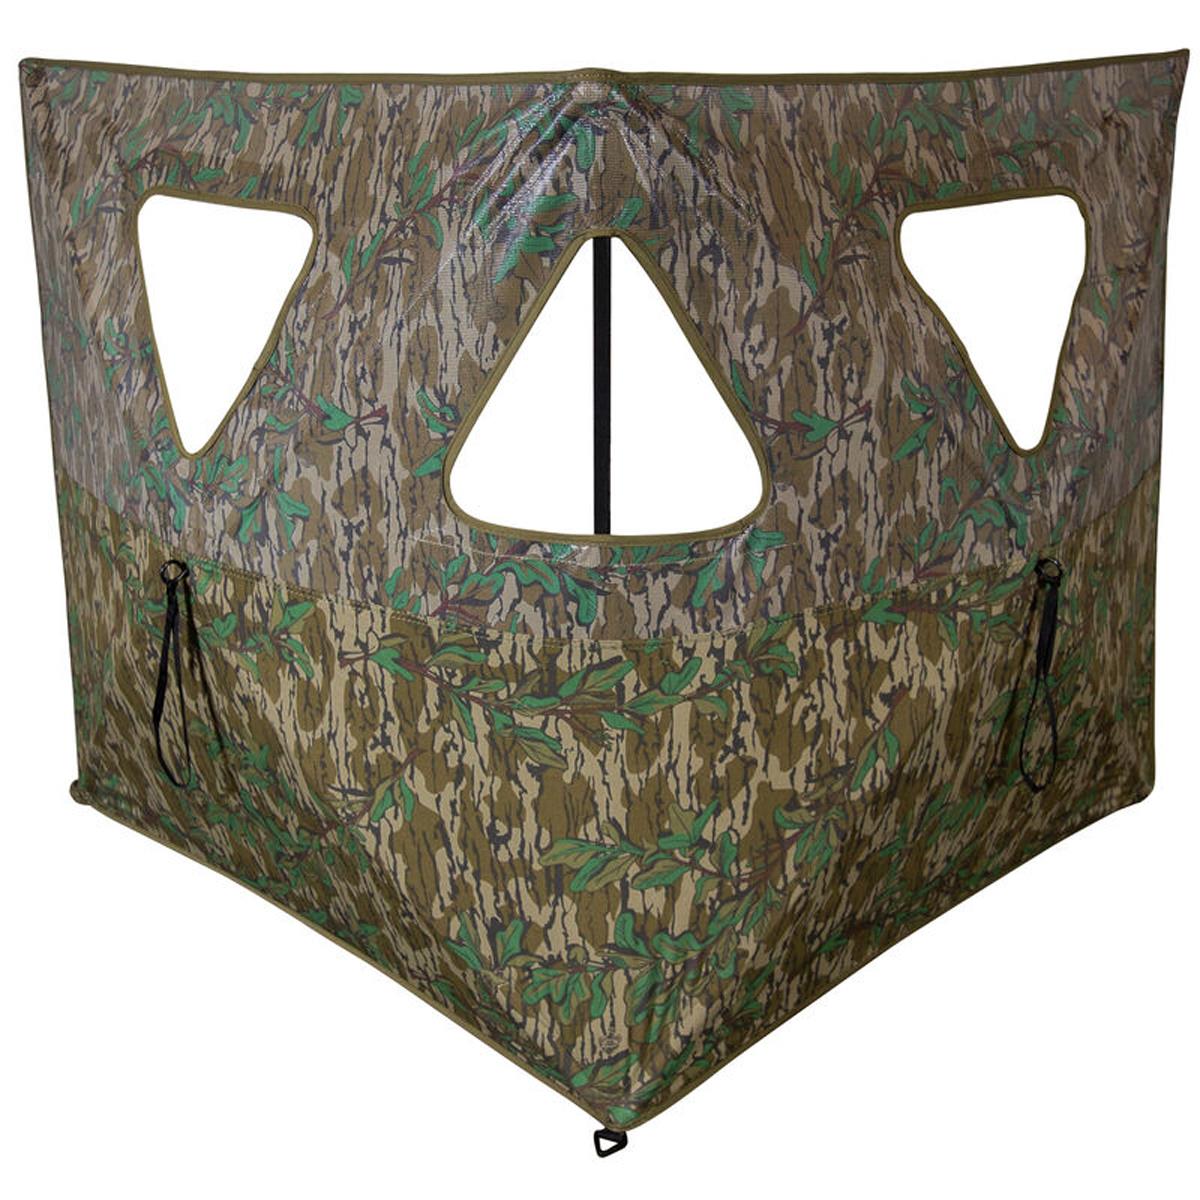 Bushnell Double Bull 2-Panel SurroundView Stakeout Hunting Blind, Mossy Oak Camo